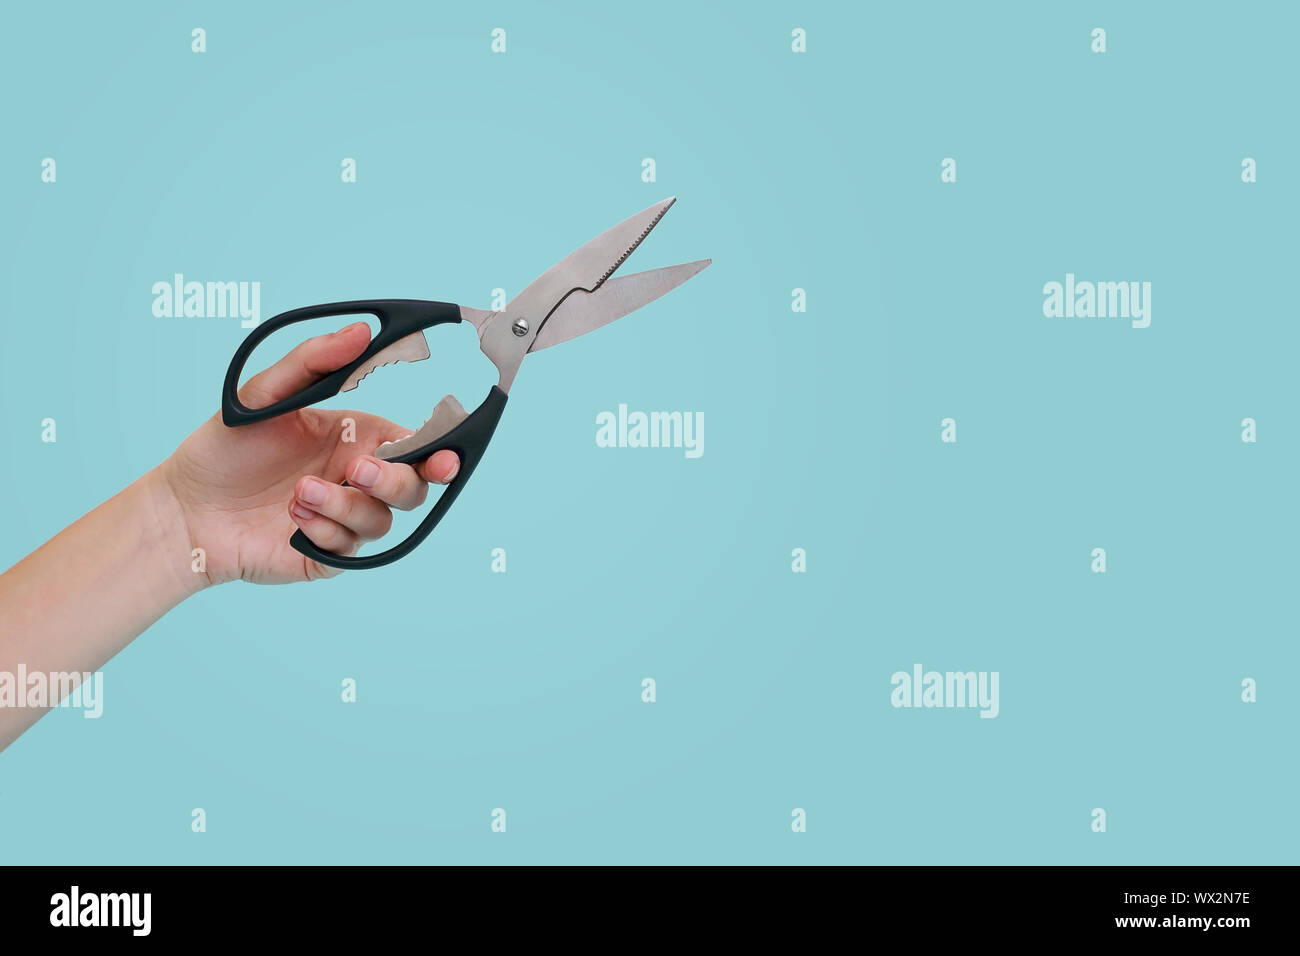 Woman's hand holding scissors on blue background with copy space. Stock Photo